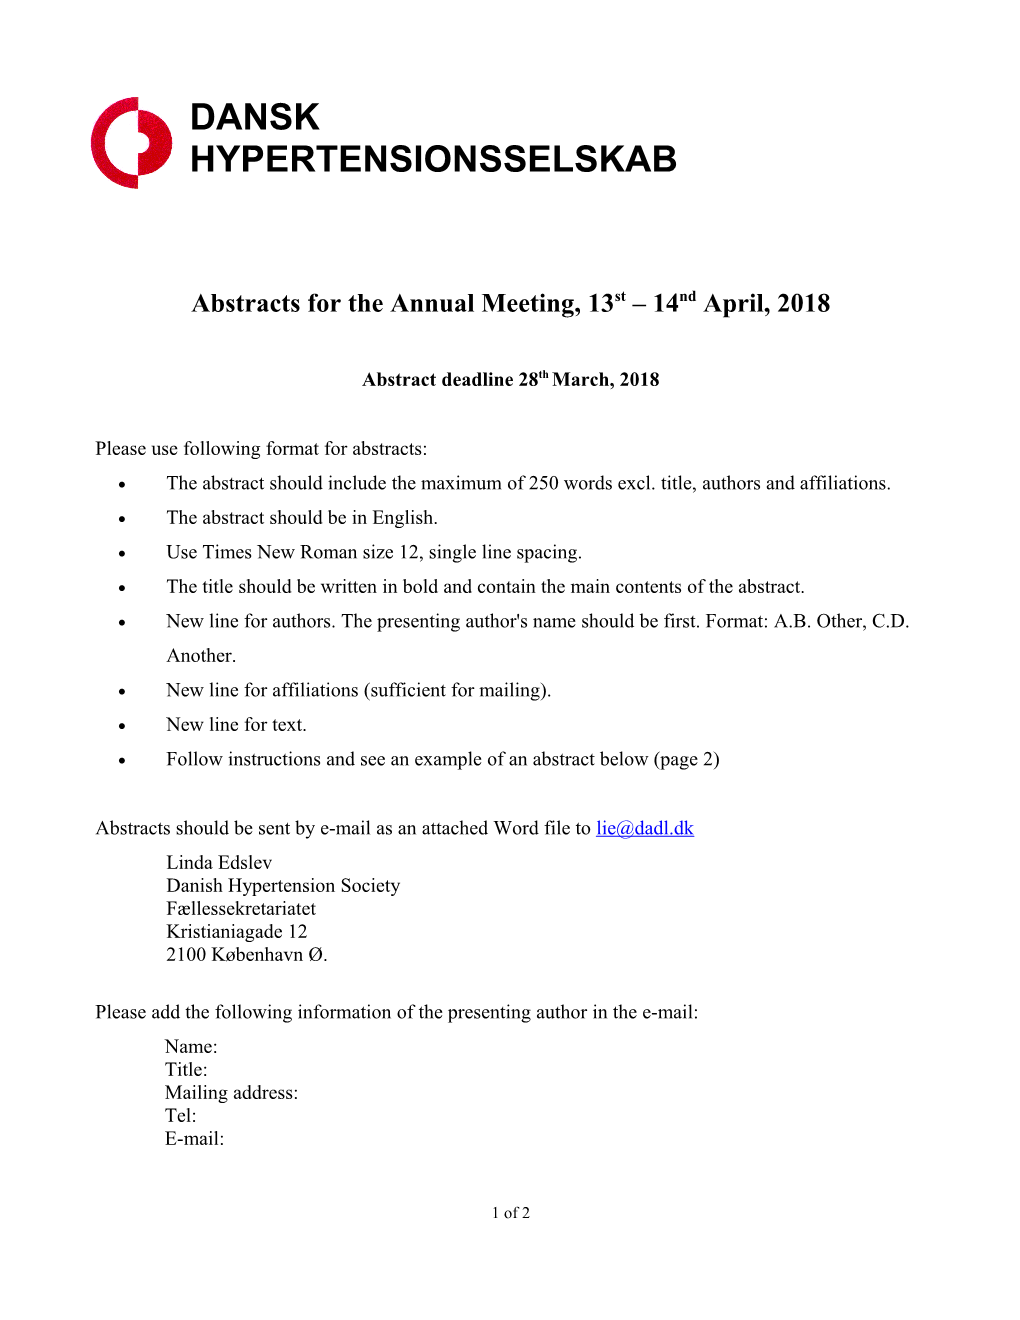 Abstracts for the Annual Meeting, 13St 14Ndapril, 2018